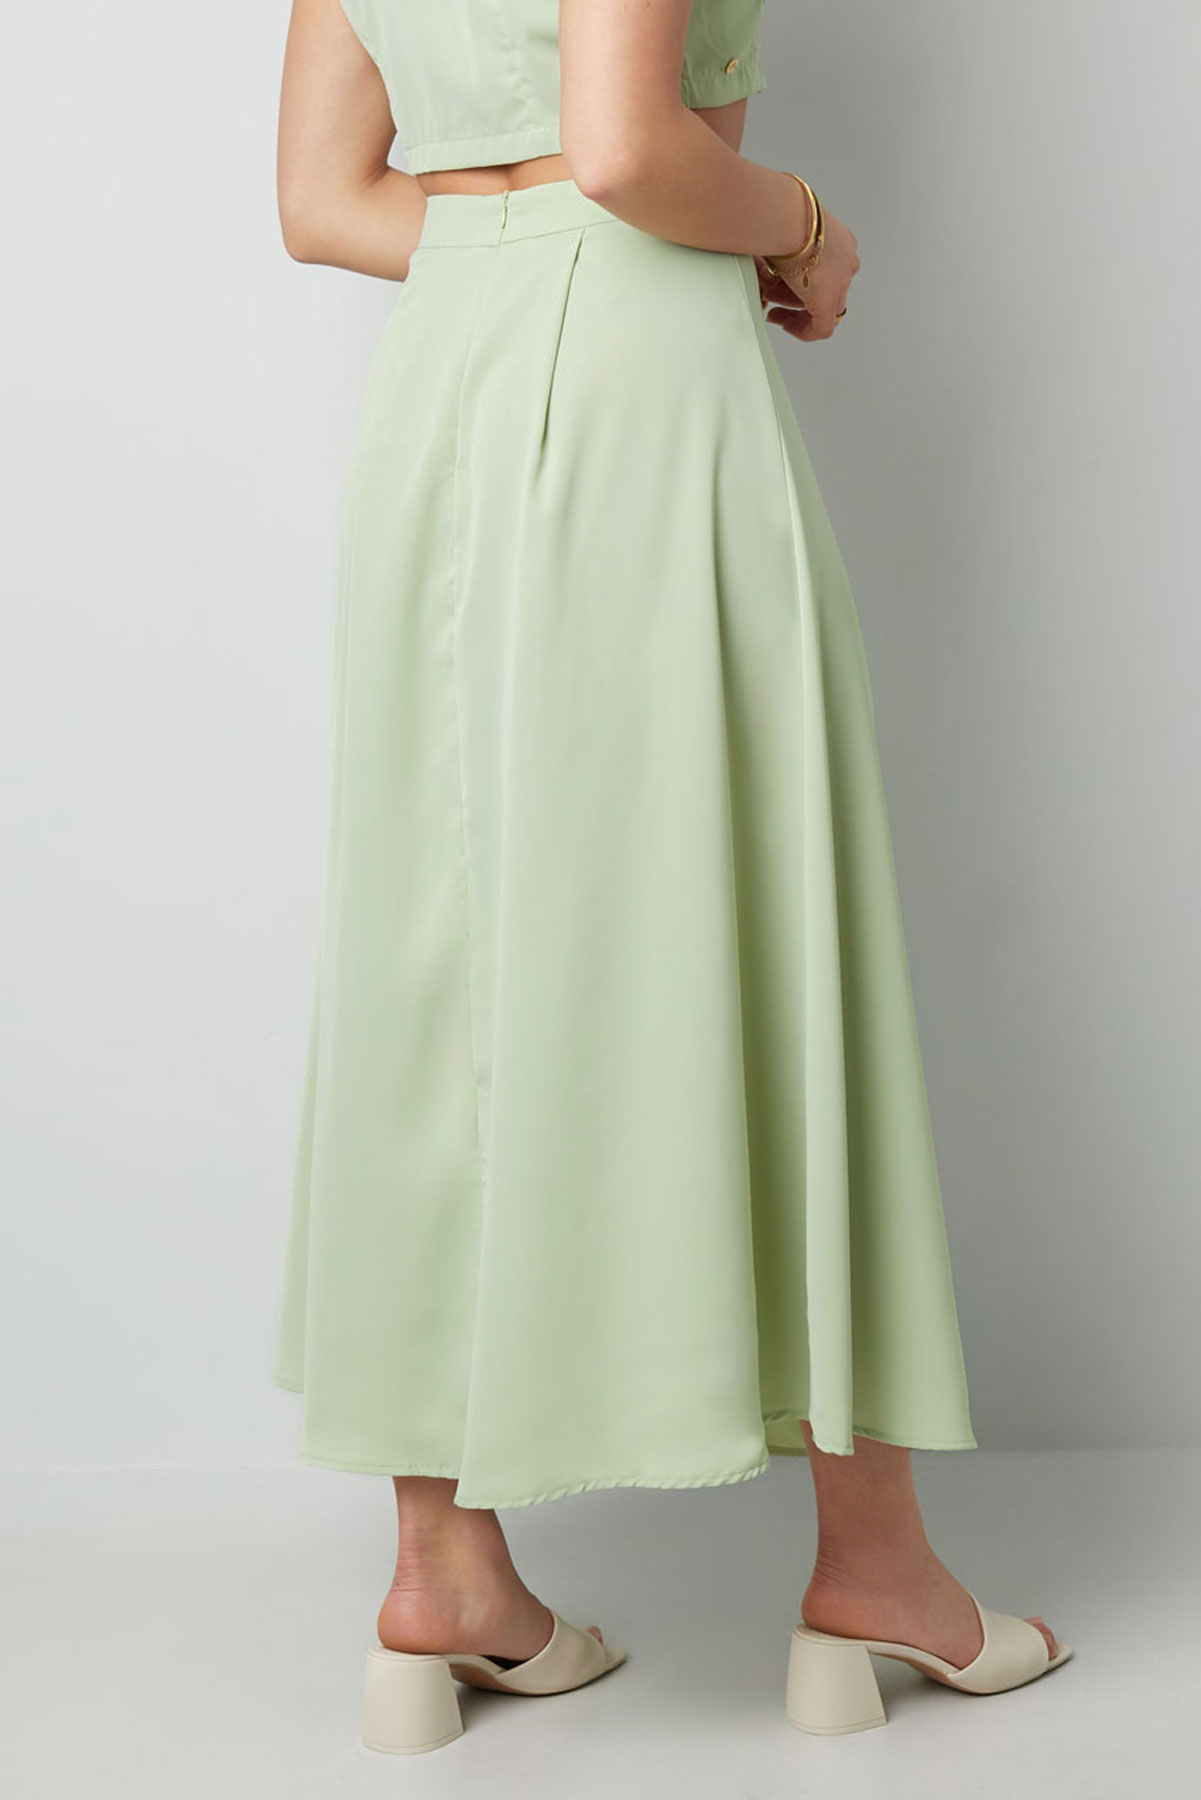 Long satin skirt - beige Picture8